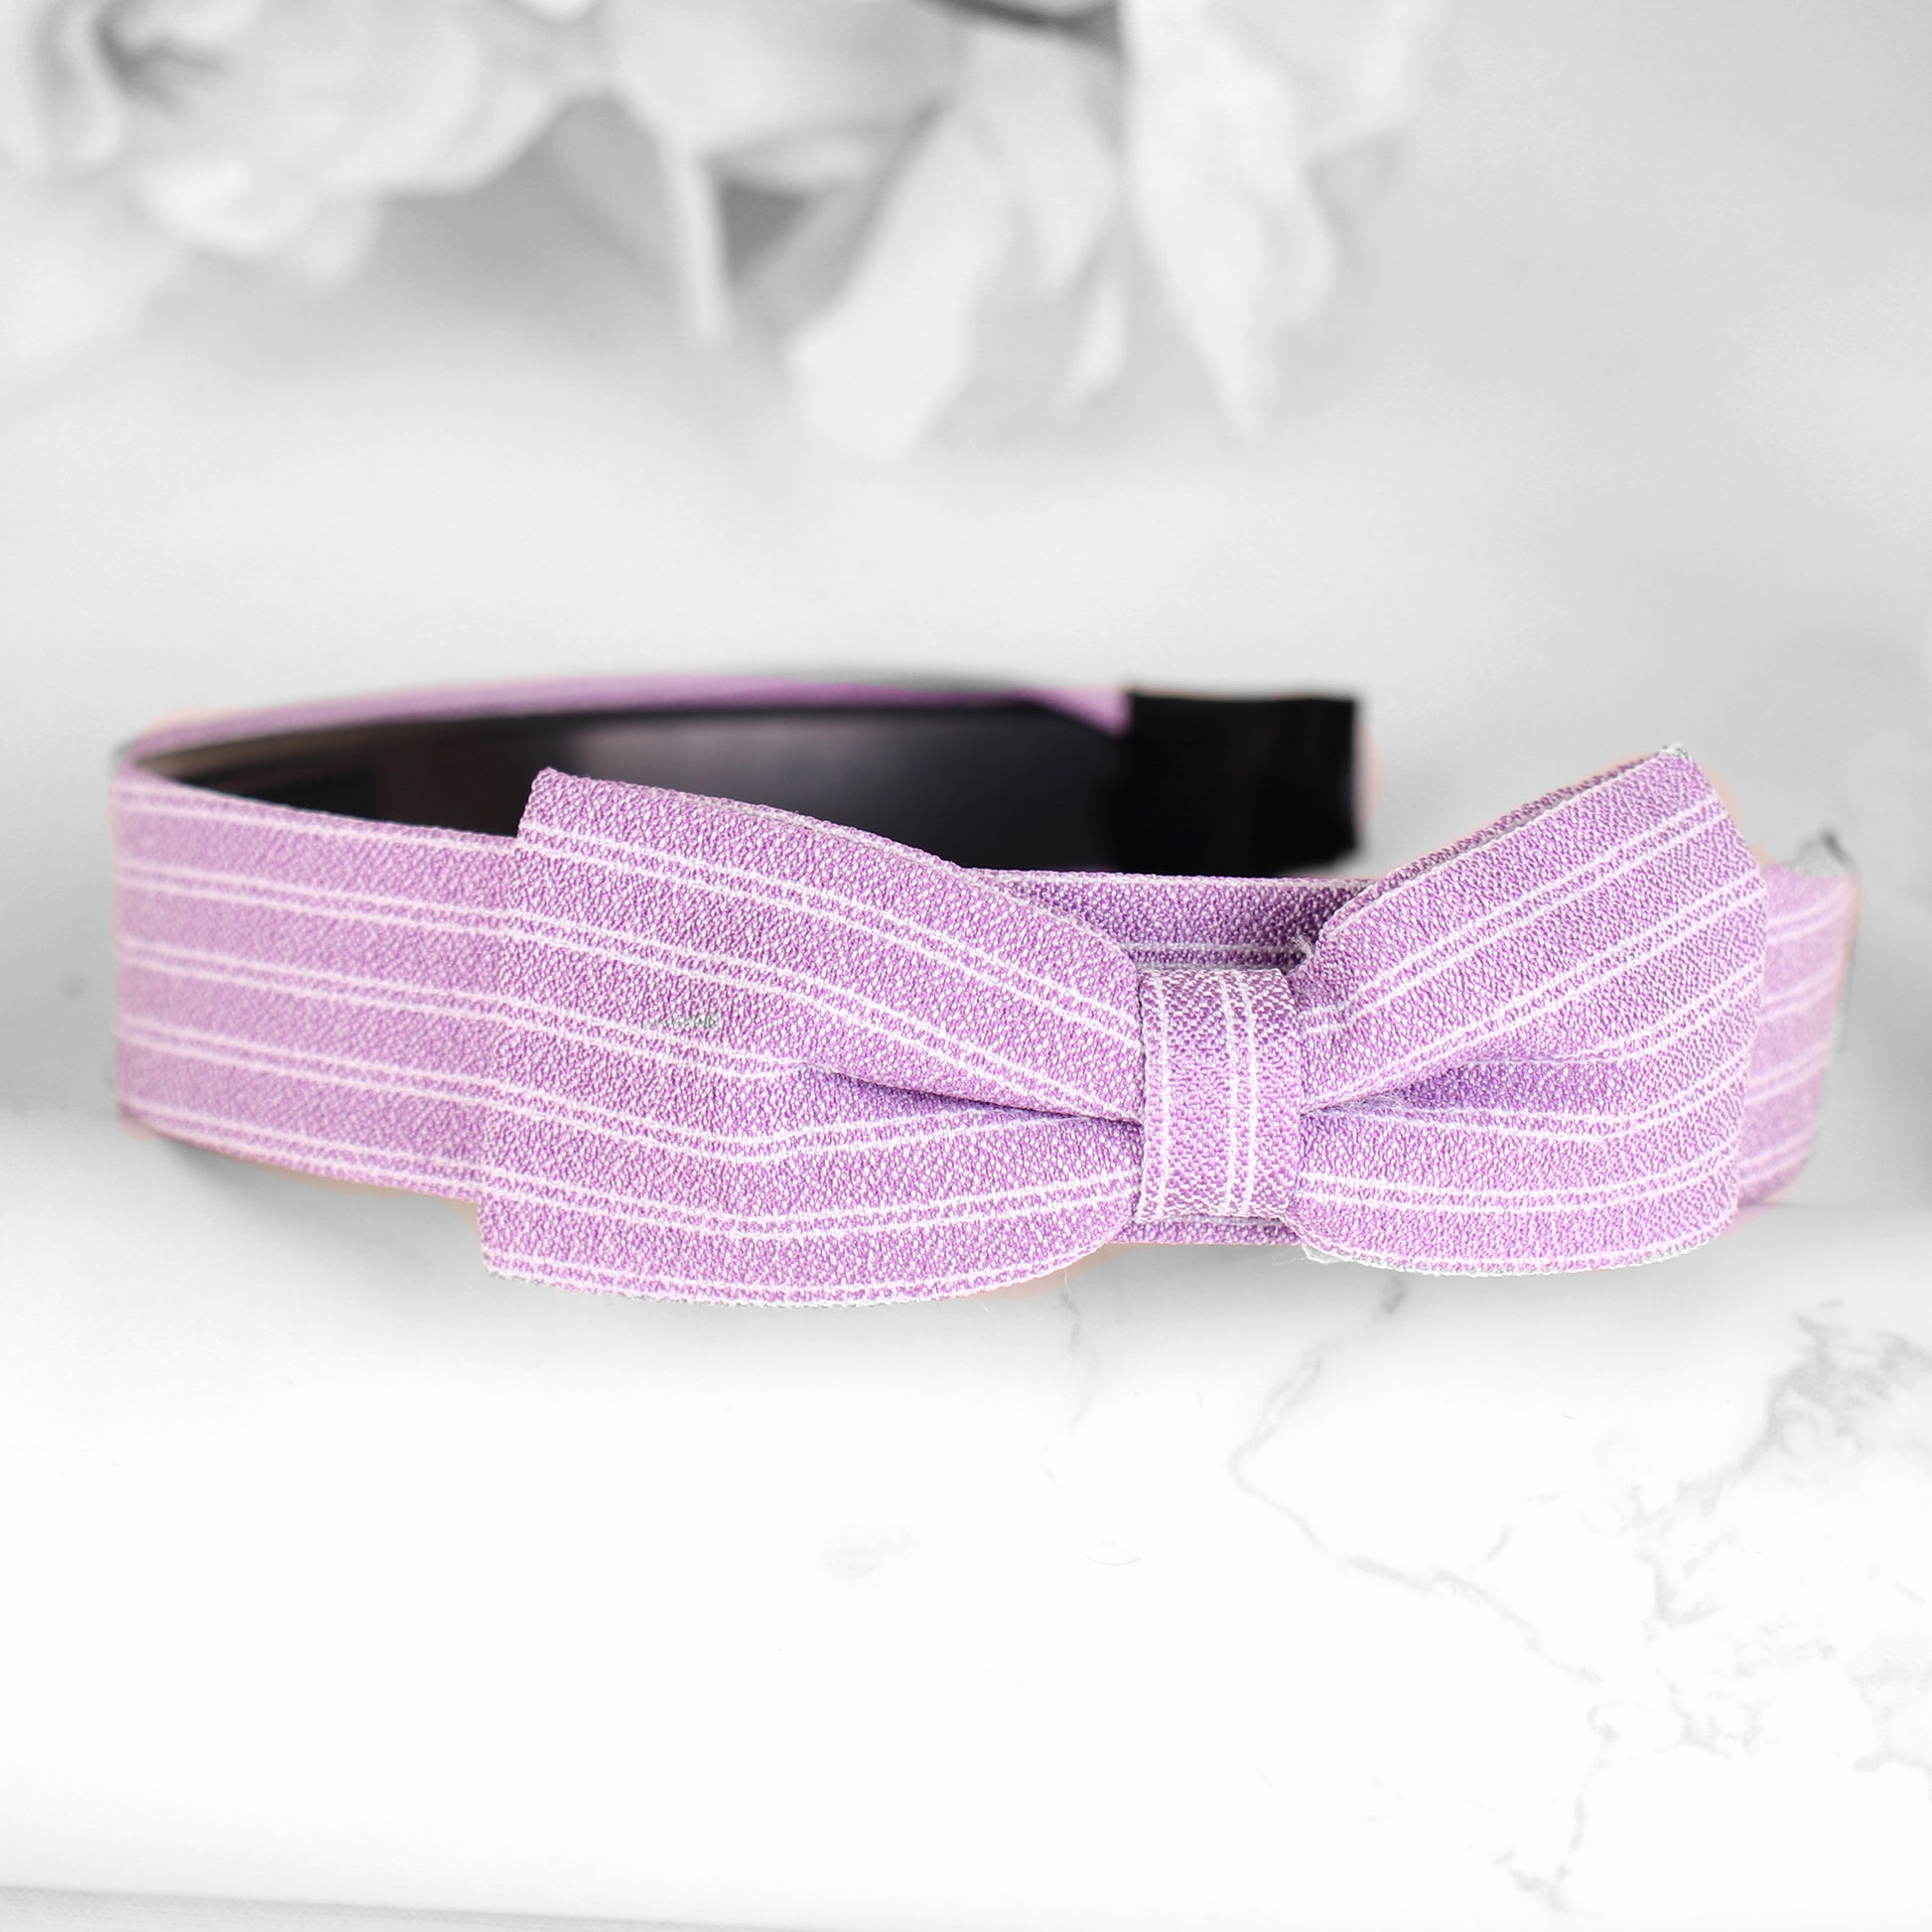 HairBand,Bewitching Bow Hair Band in Mauve - Cippele Multi Store